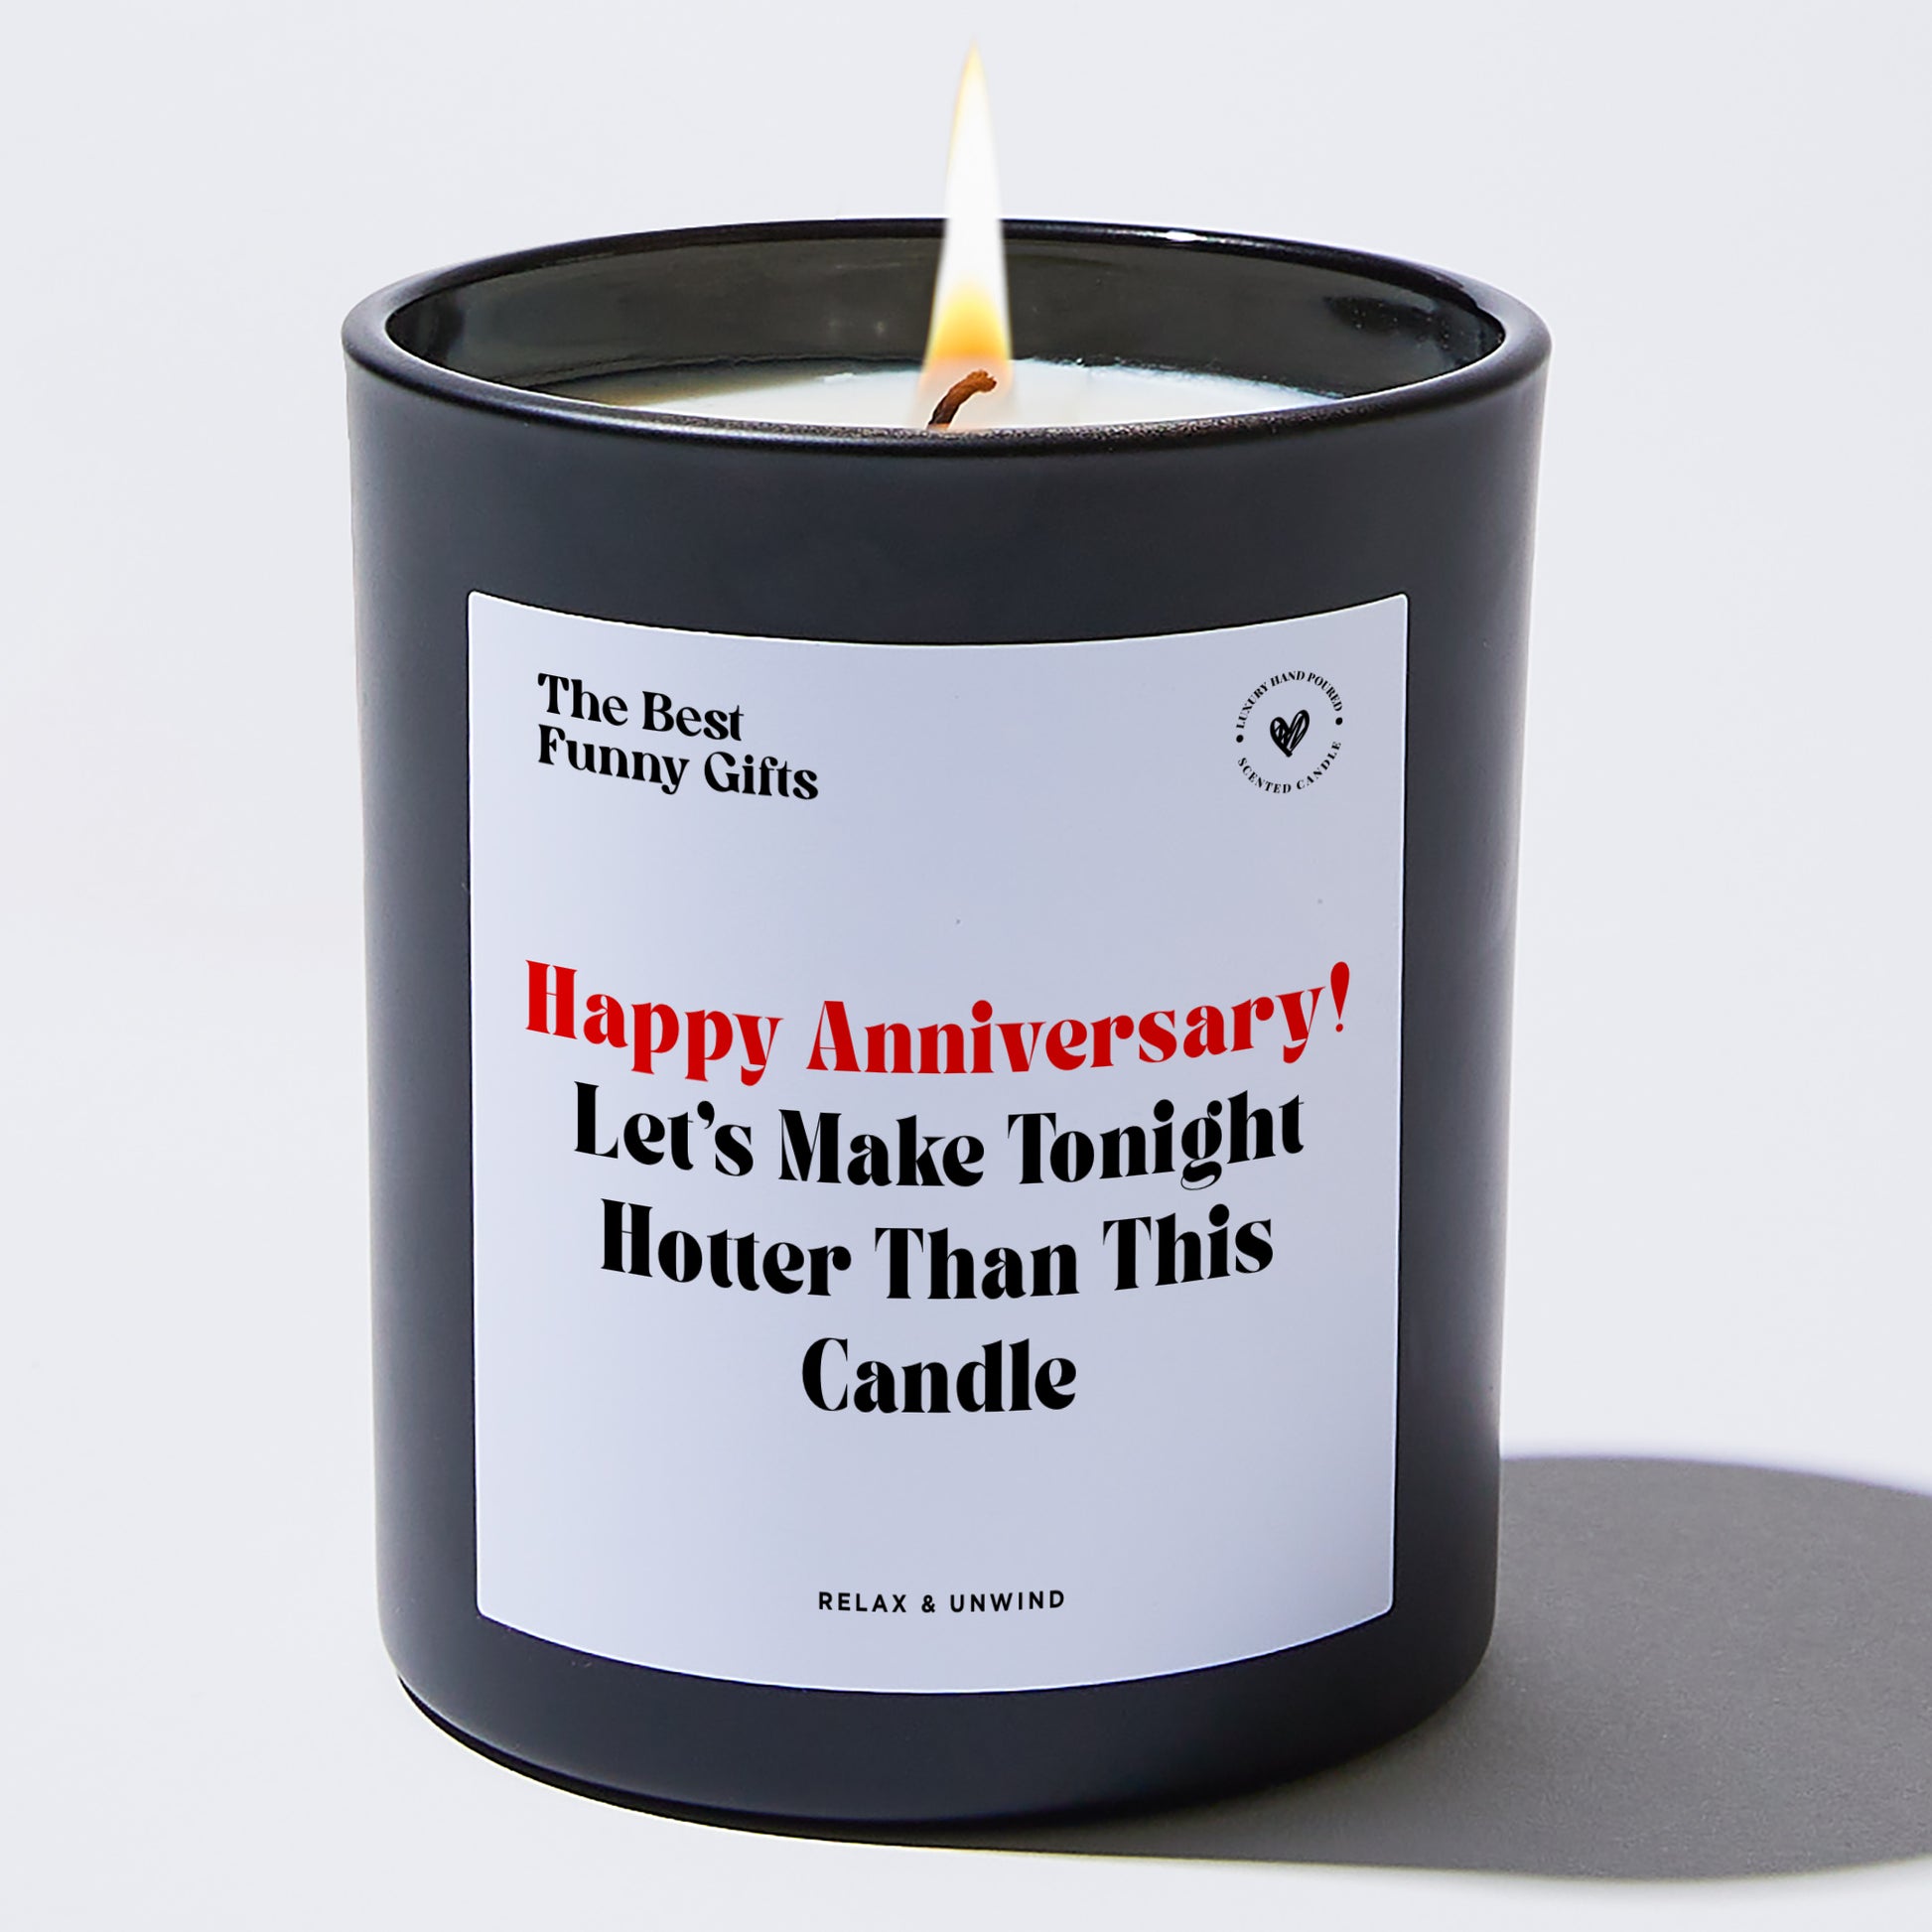 Anniversary Gift Happy Anniversary! Let's Make Tonight Hotter Than This Candle - The Best Funny Gifts